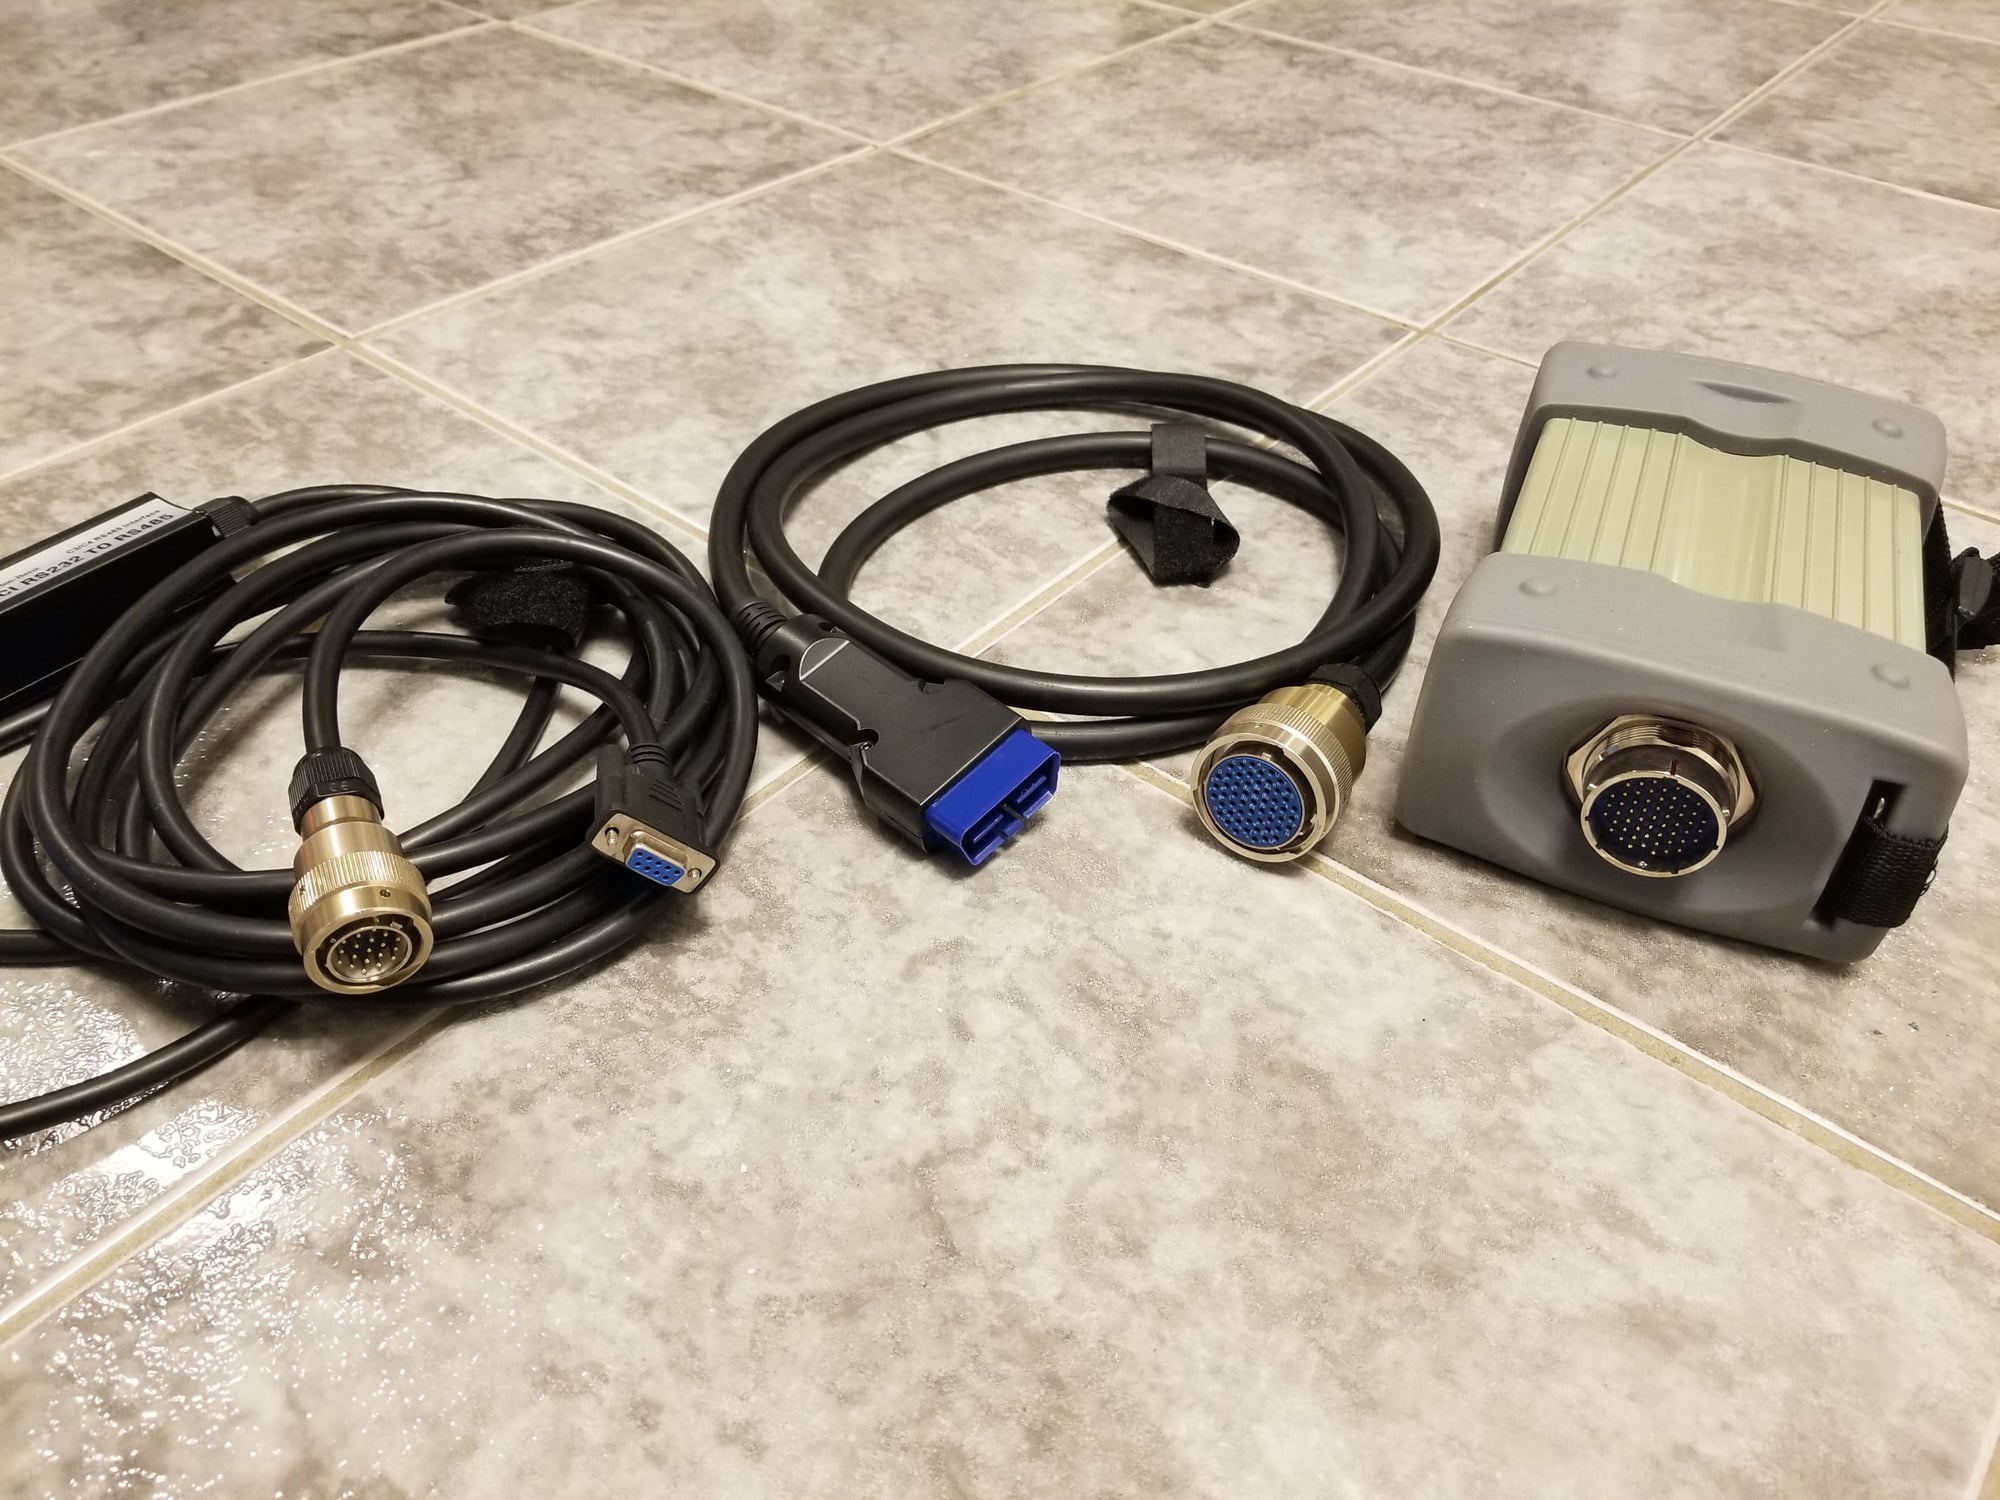 Audio Video/Electronics - Star Diagnostics with Dell D600 with software and cables - Complete kit - Used - New York, NY 10011, United States